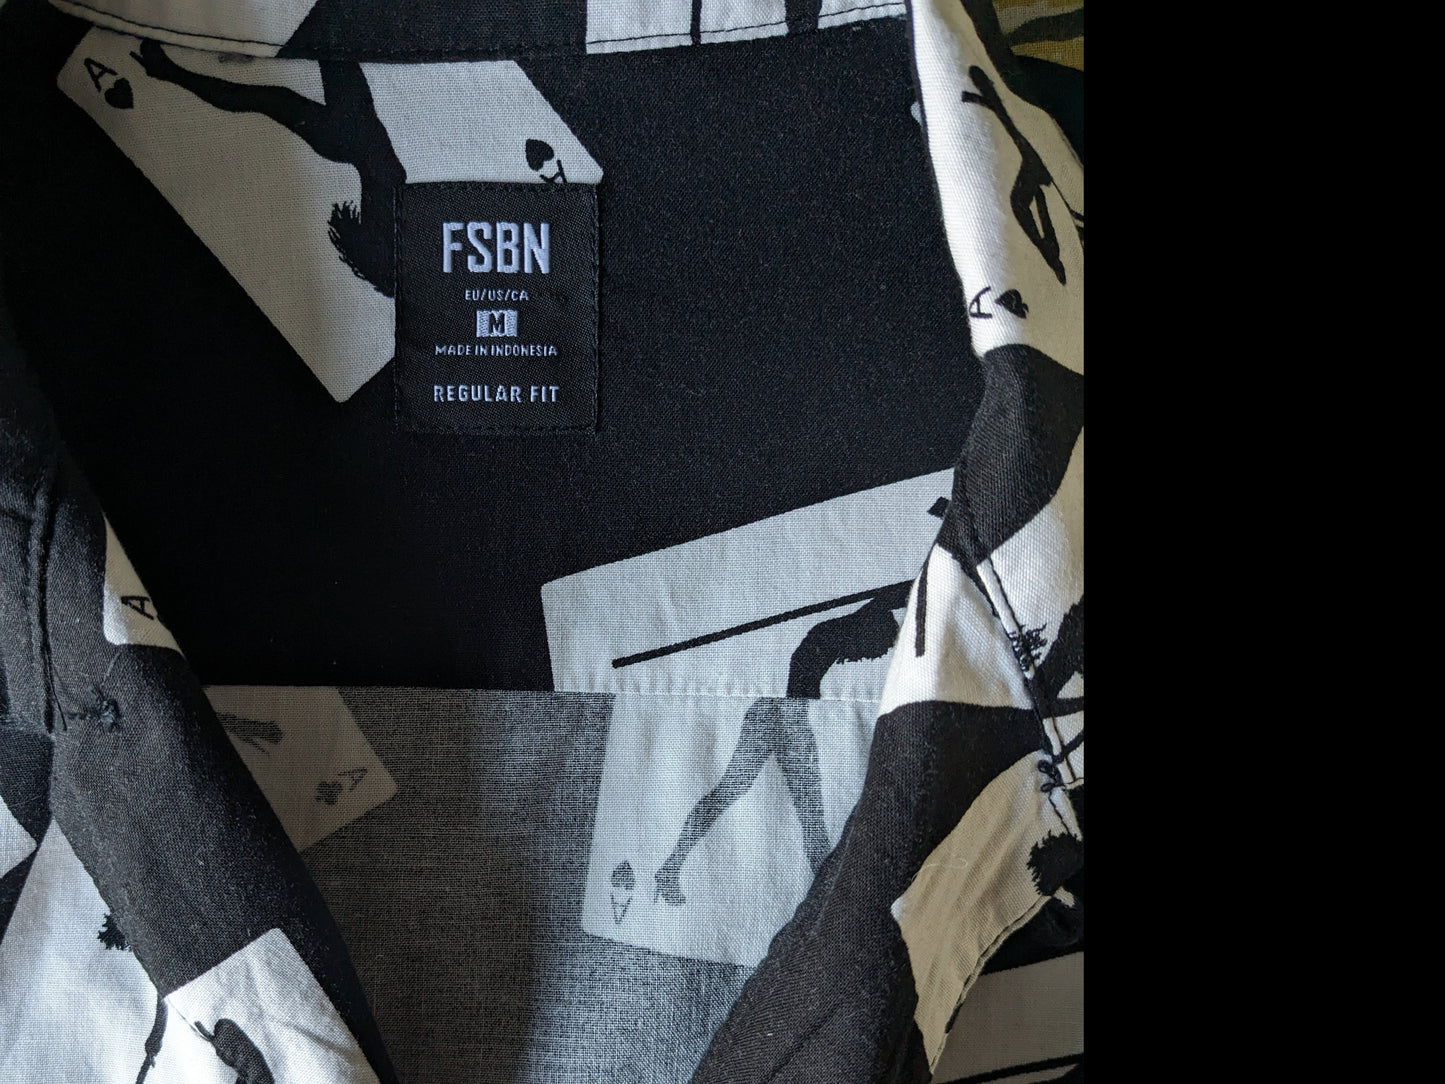 Fsbn shirt short sleeve. Black and white pin-up card print. Size M. Regular Fit.